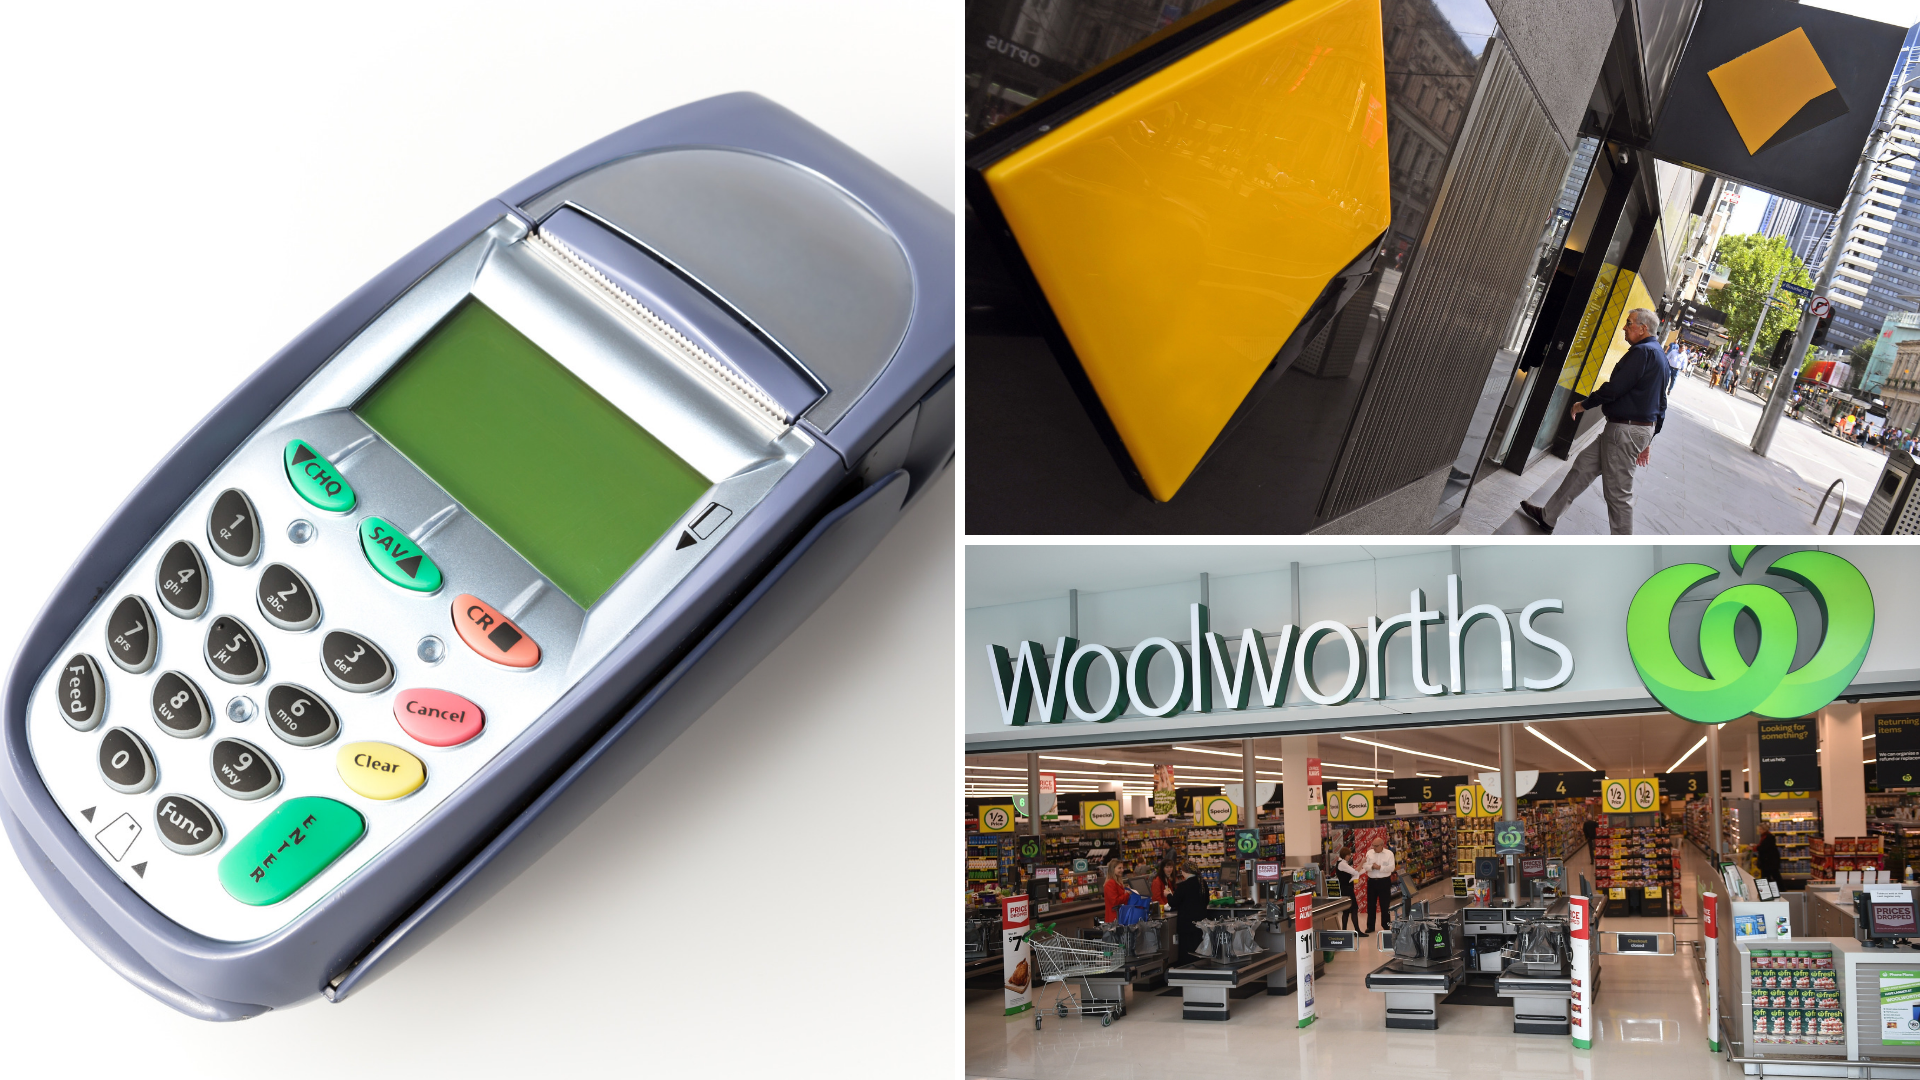 EFTPOS outage hits Woolworths, Commonwealth Bank